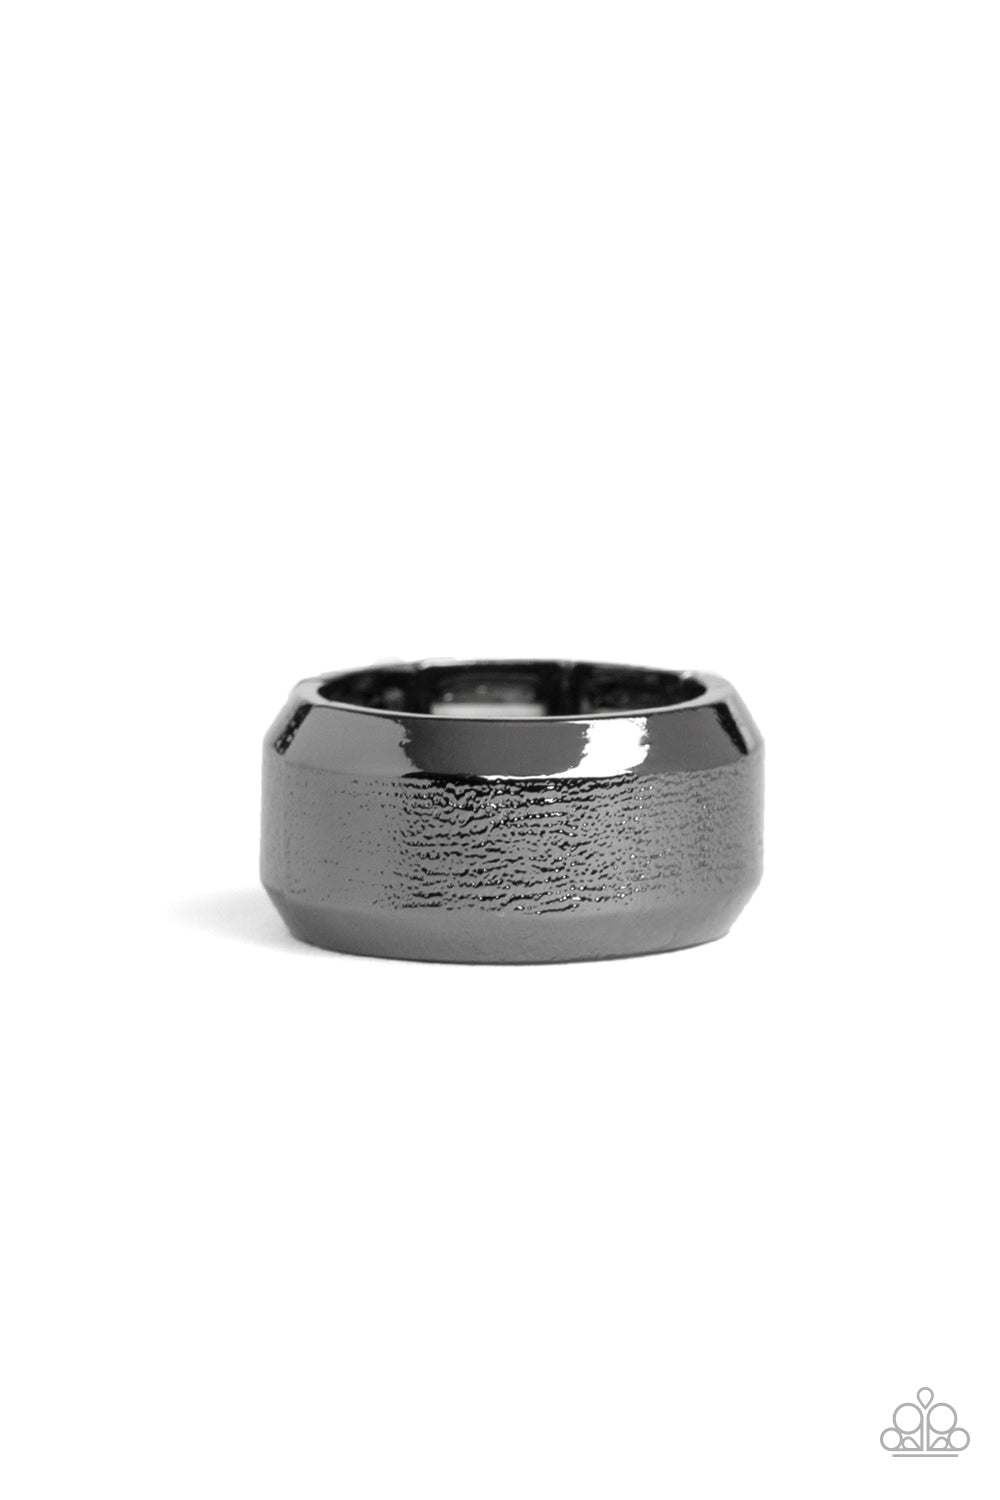 checkmate-black-ring